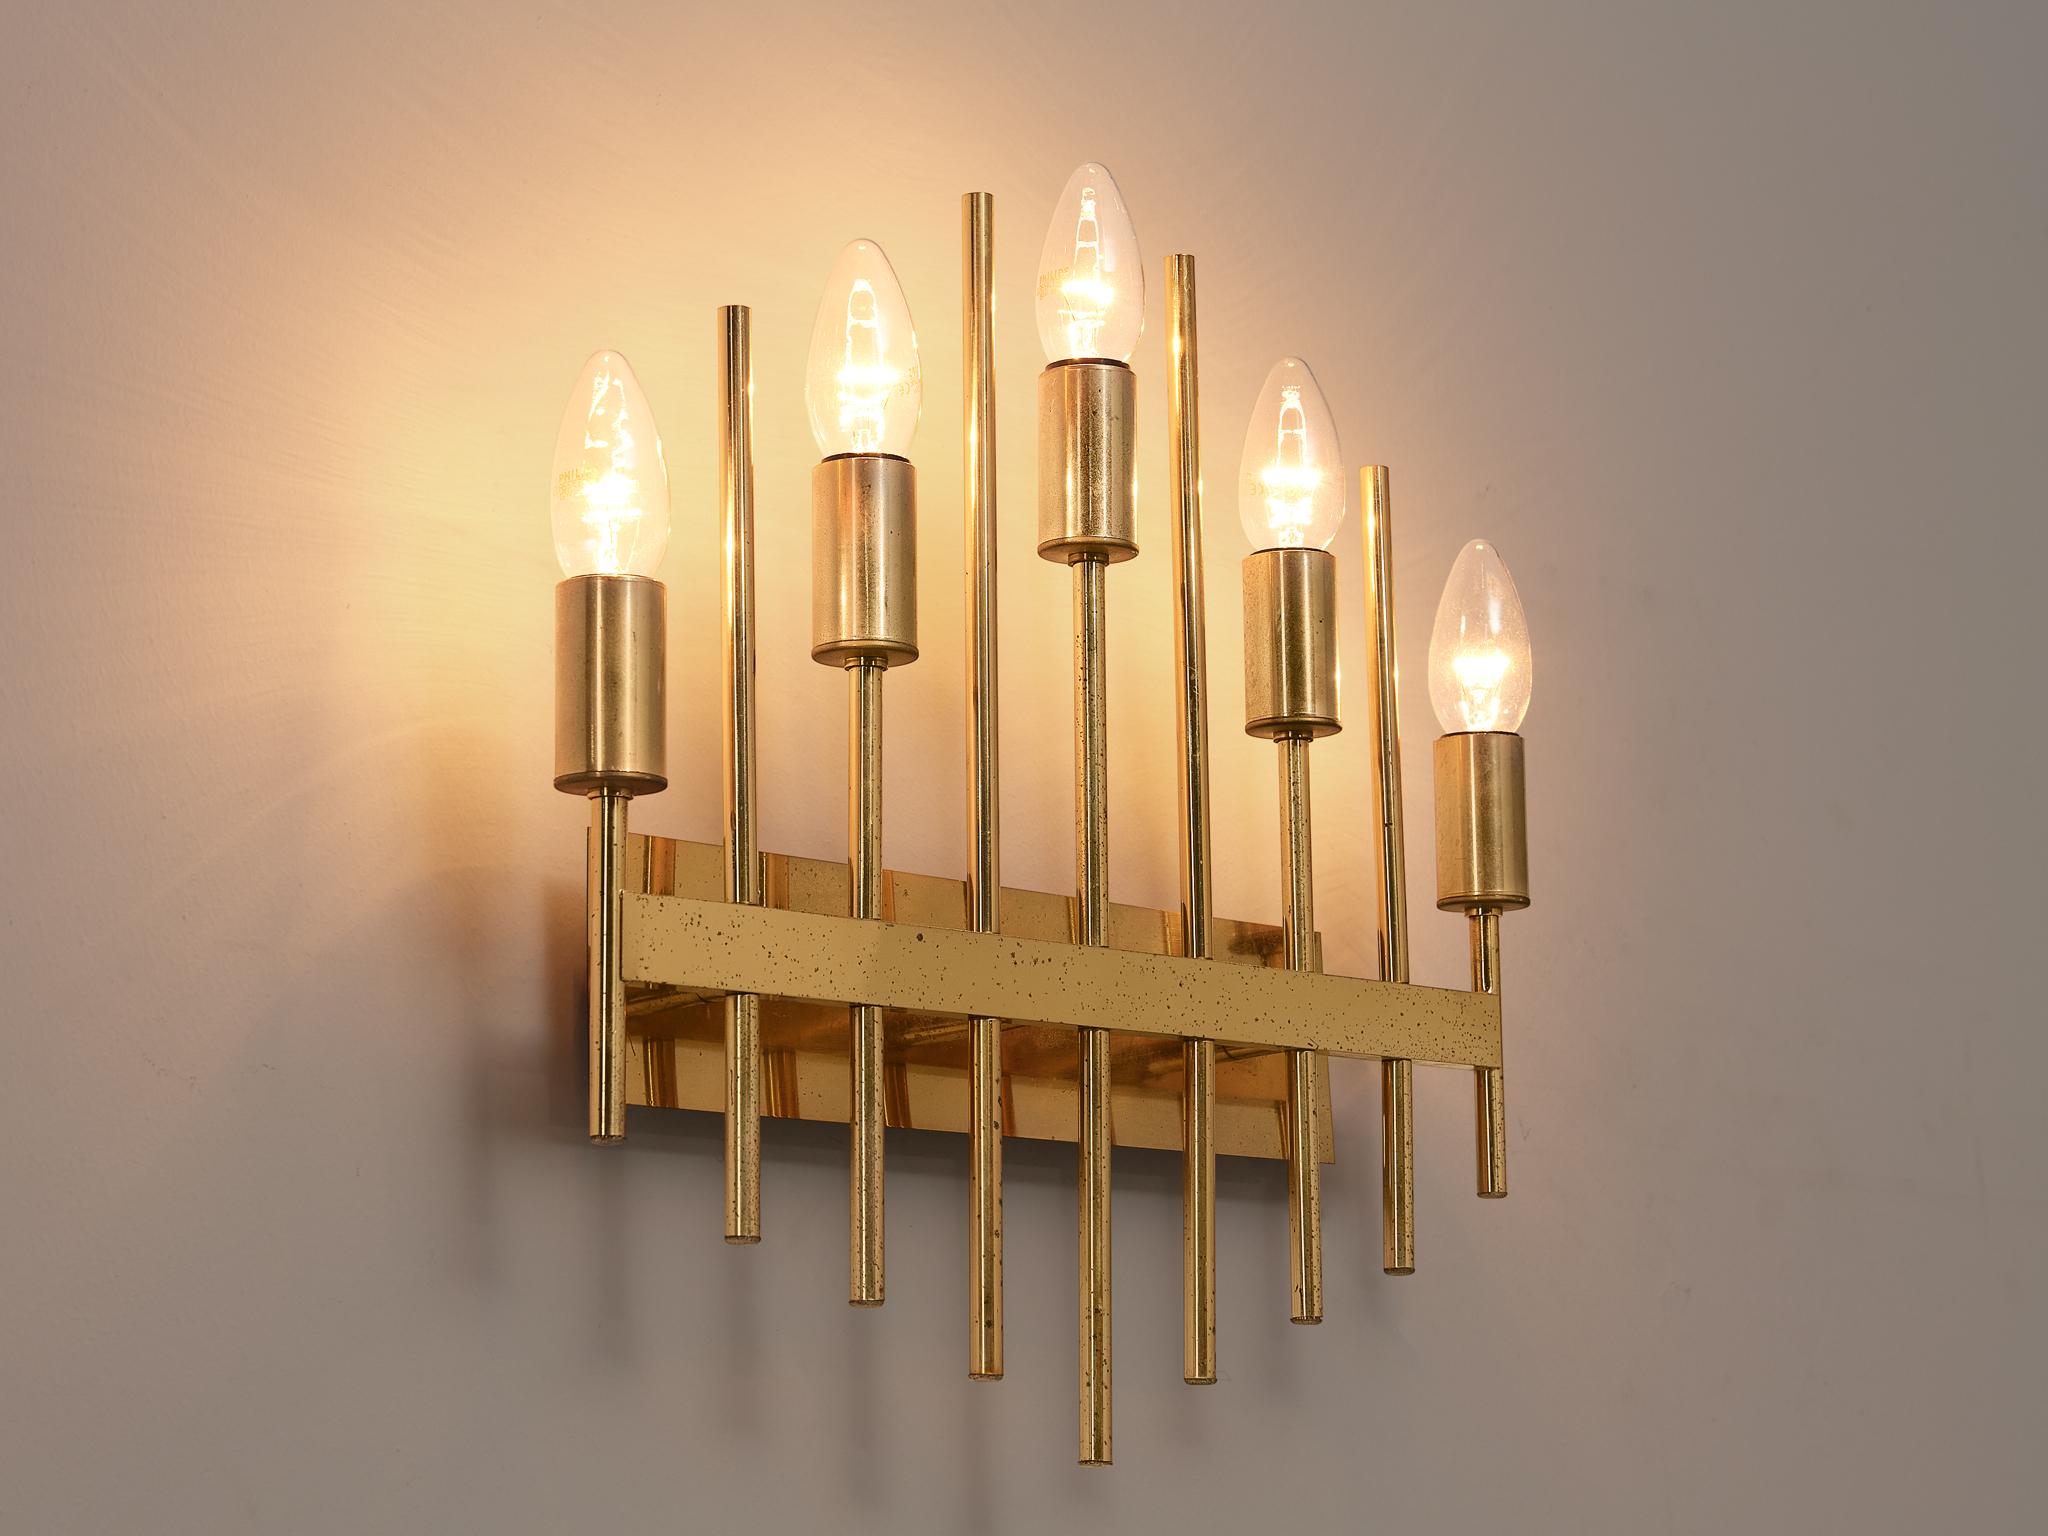 Wall light, brass, Europe, 1960s. 

This eccentric wall light is executed in brass. The design features a beautiful fixture constructed of brass tubes that are elegantly shaped. Five tubes hold each a cylindrical light socket. The lamp adds